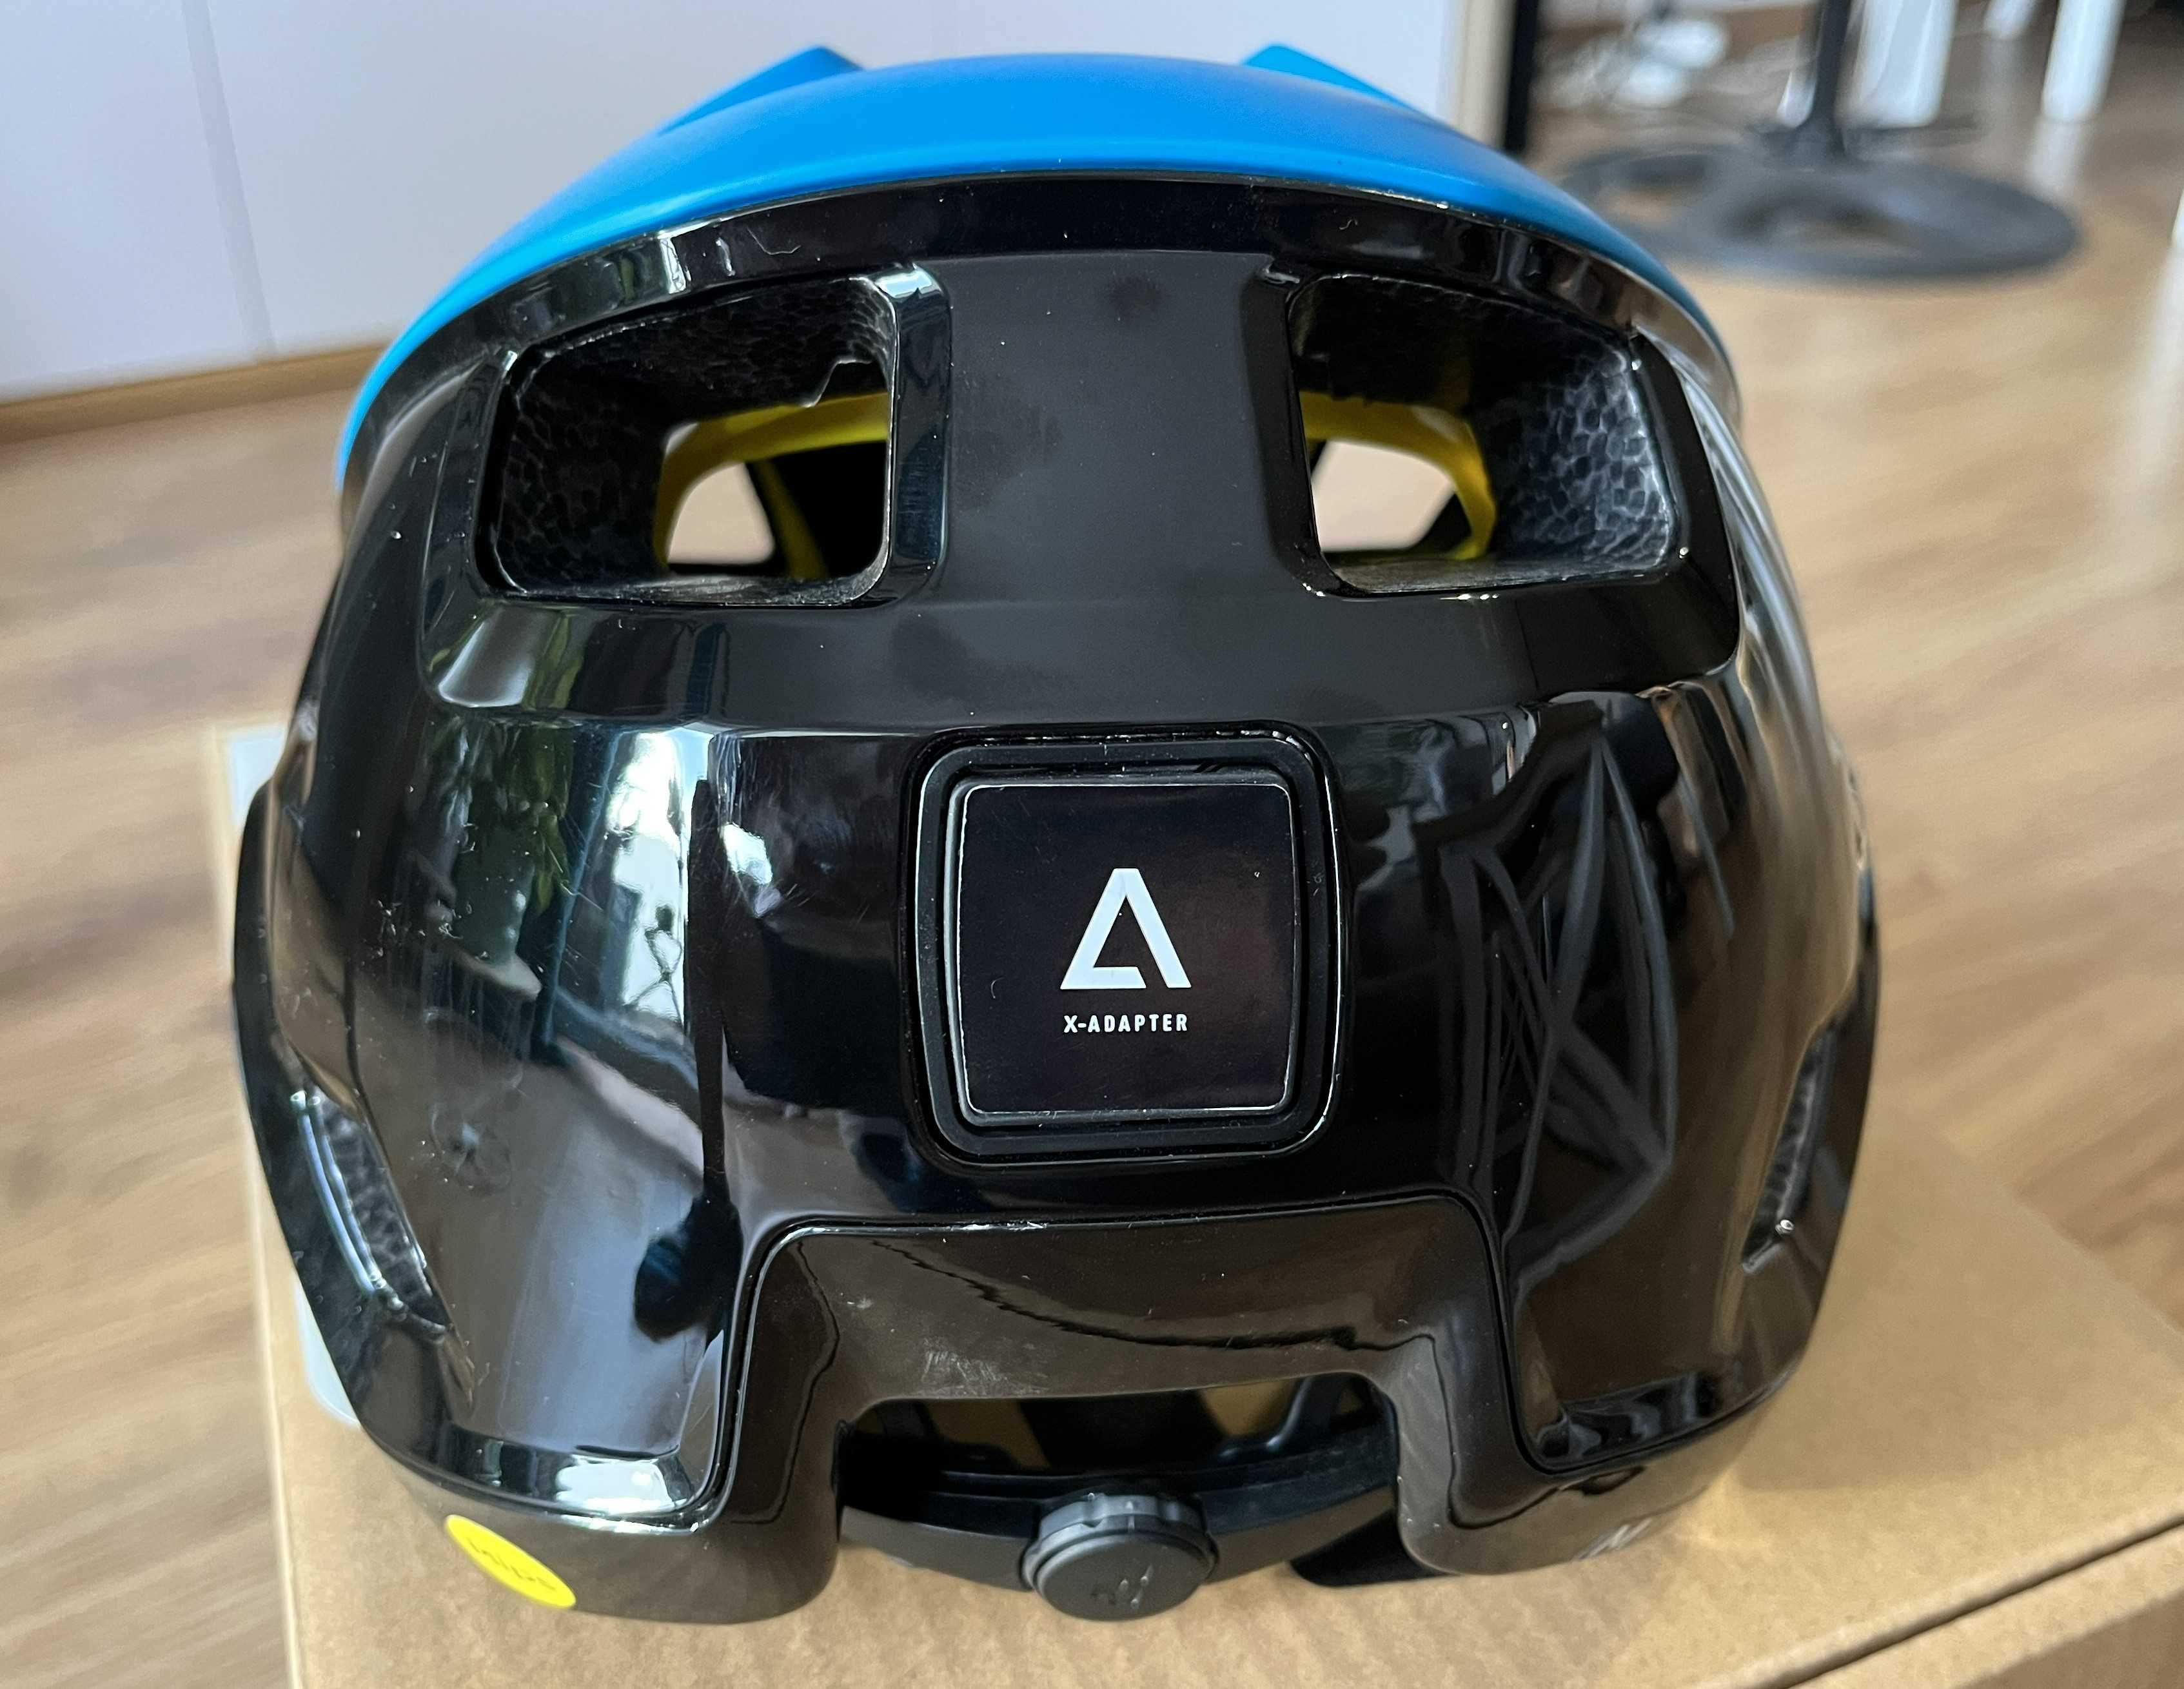 Kask enduro CUBE Strover M (52-57cm) ActionTeam